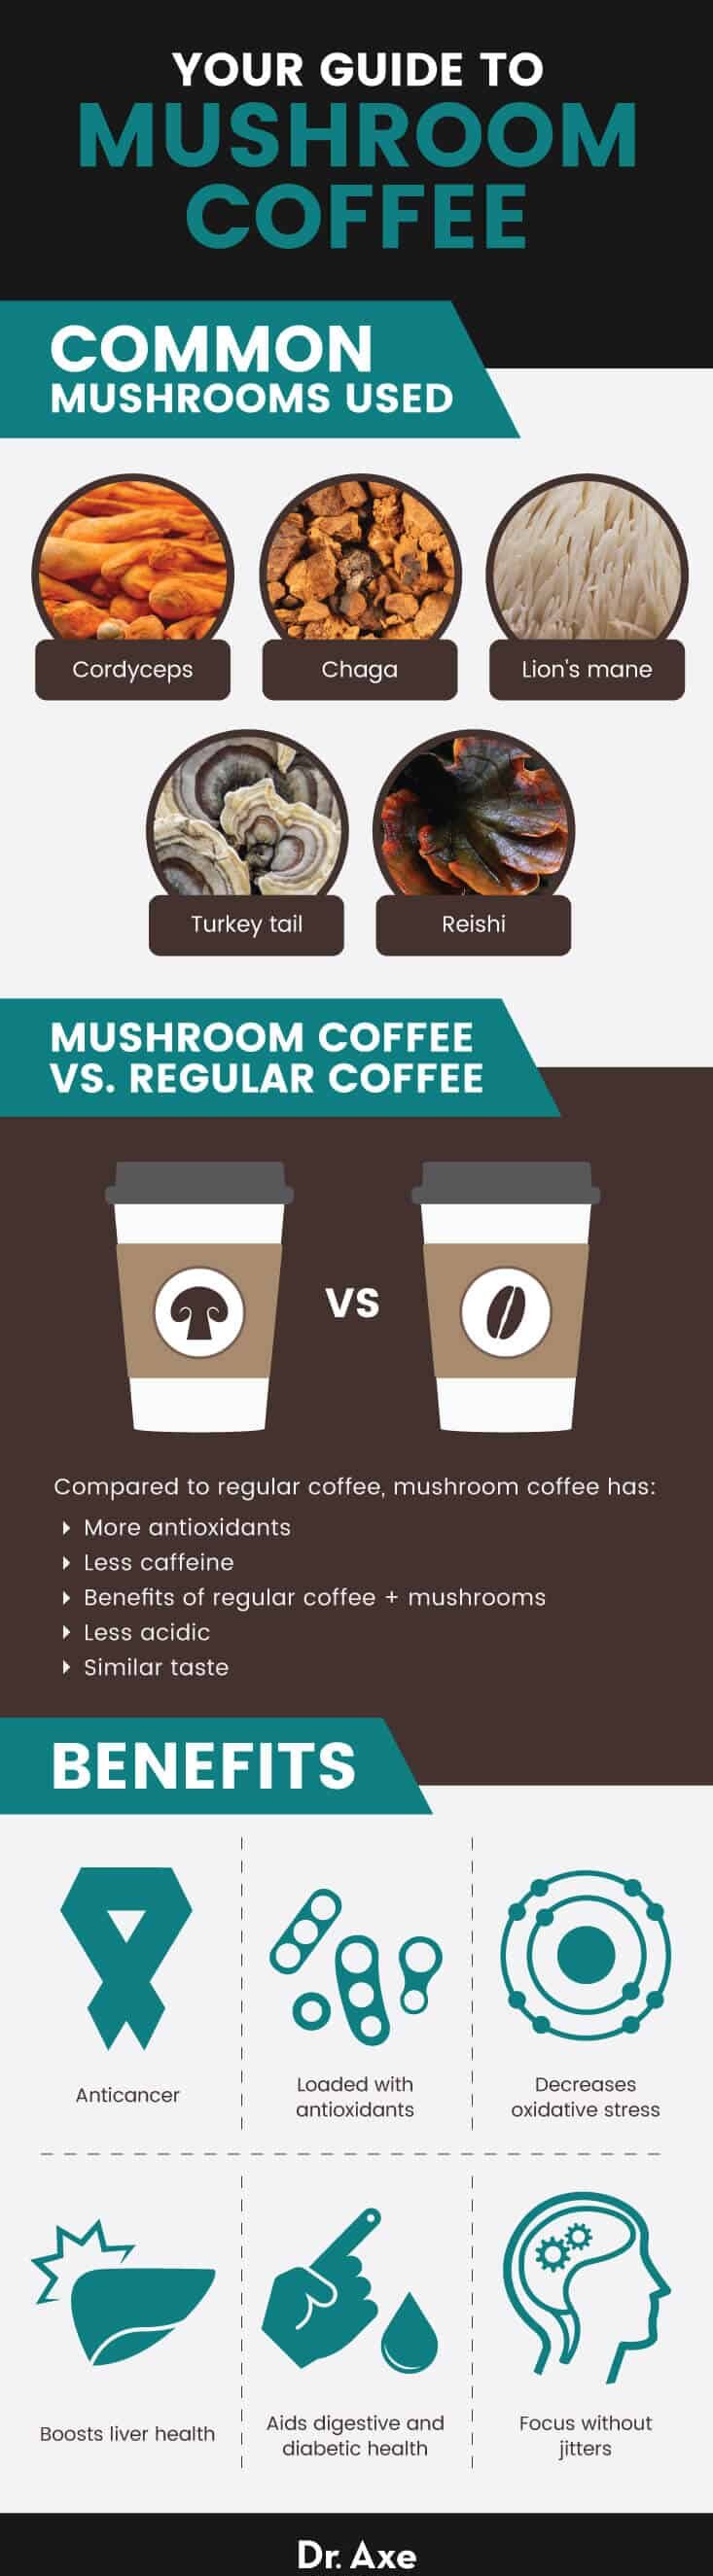 Your guide to mushroom coffee - Dr. Axe